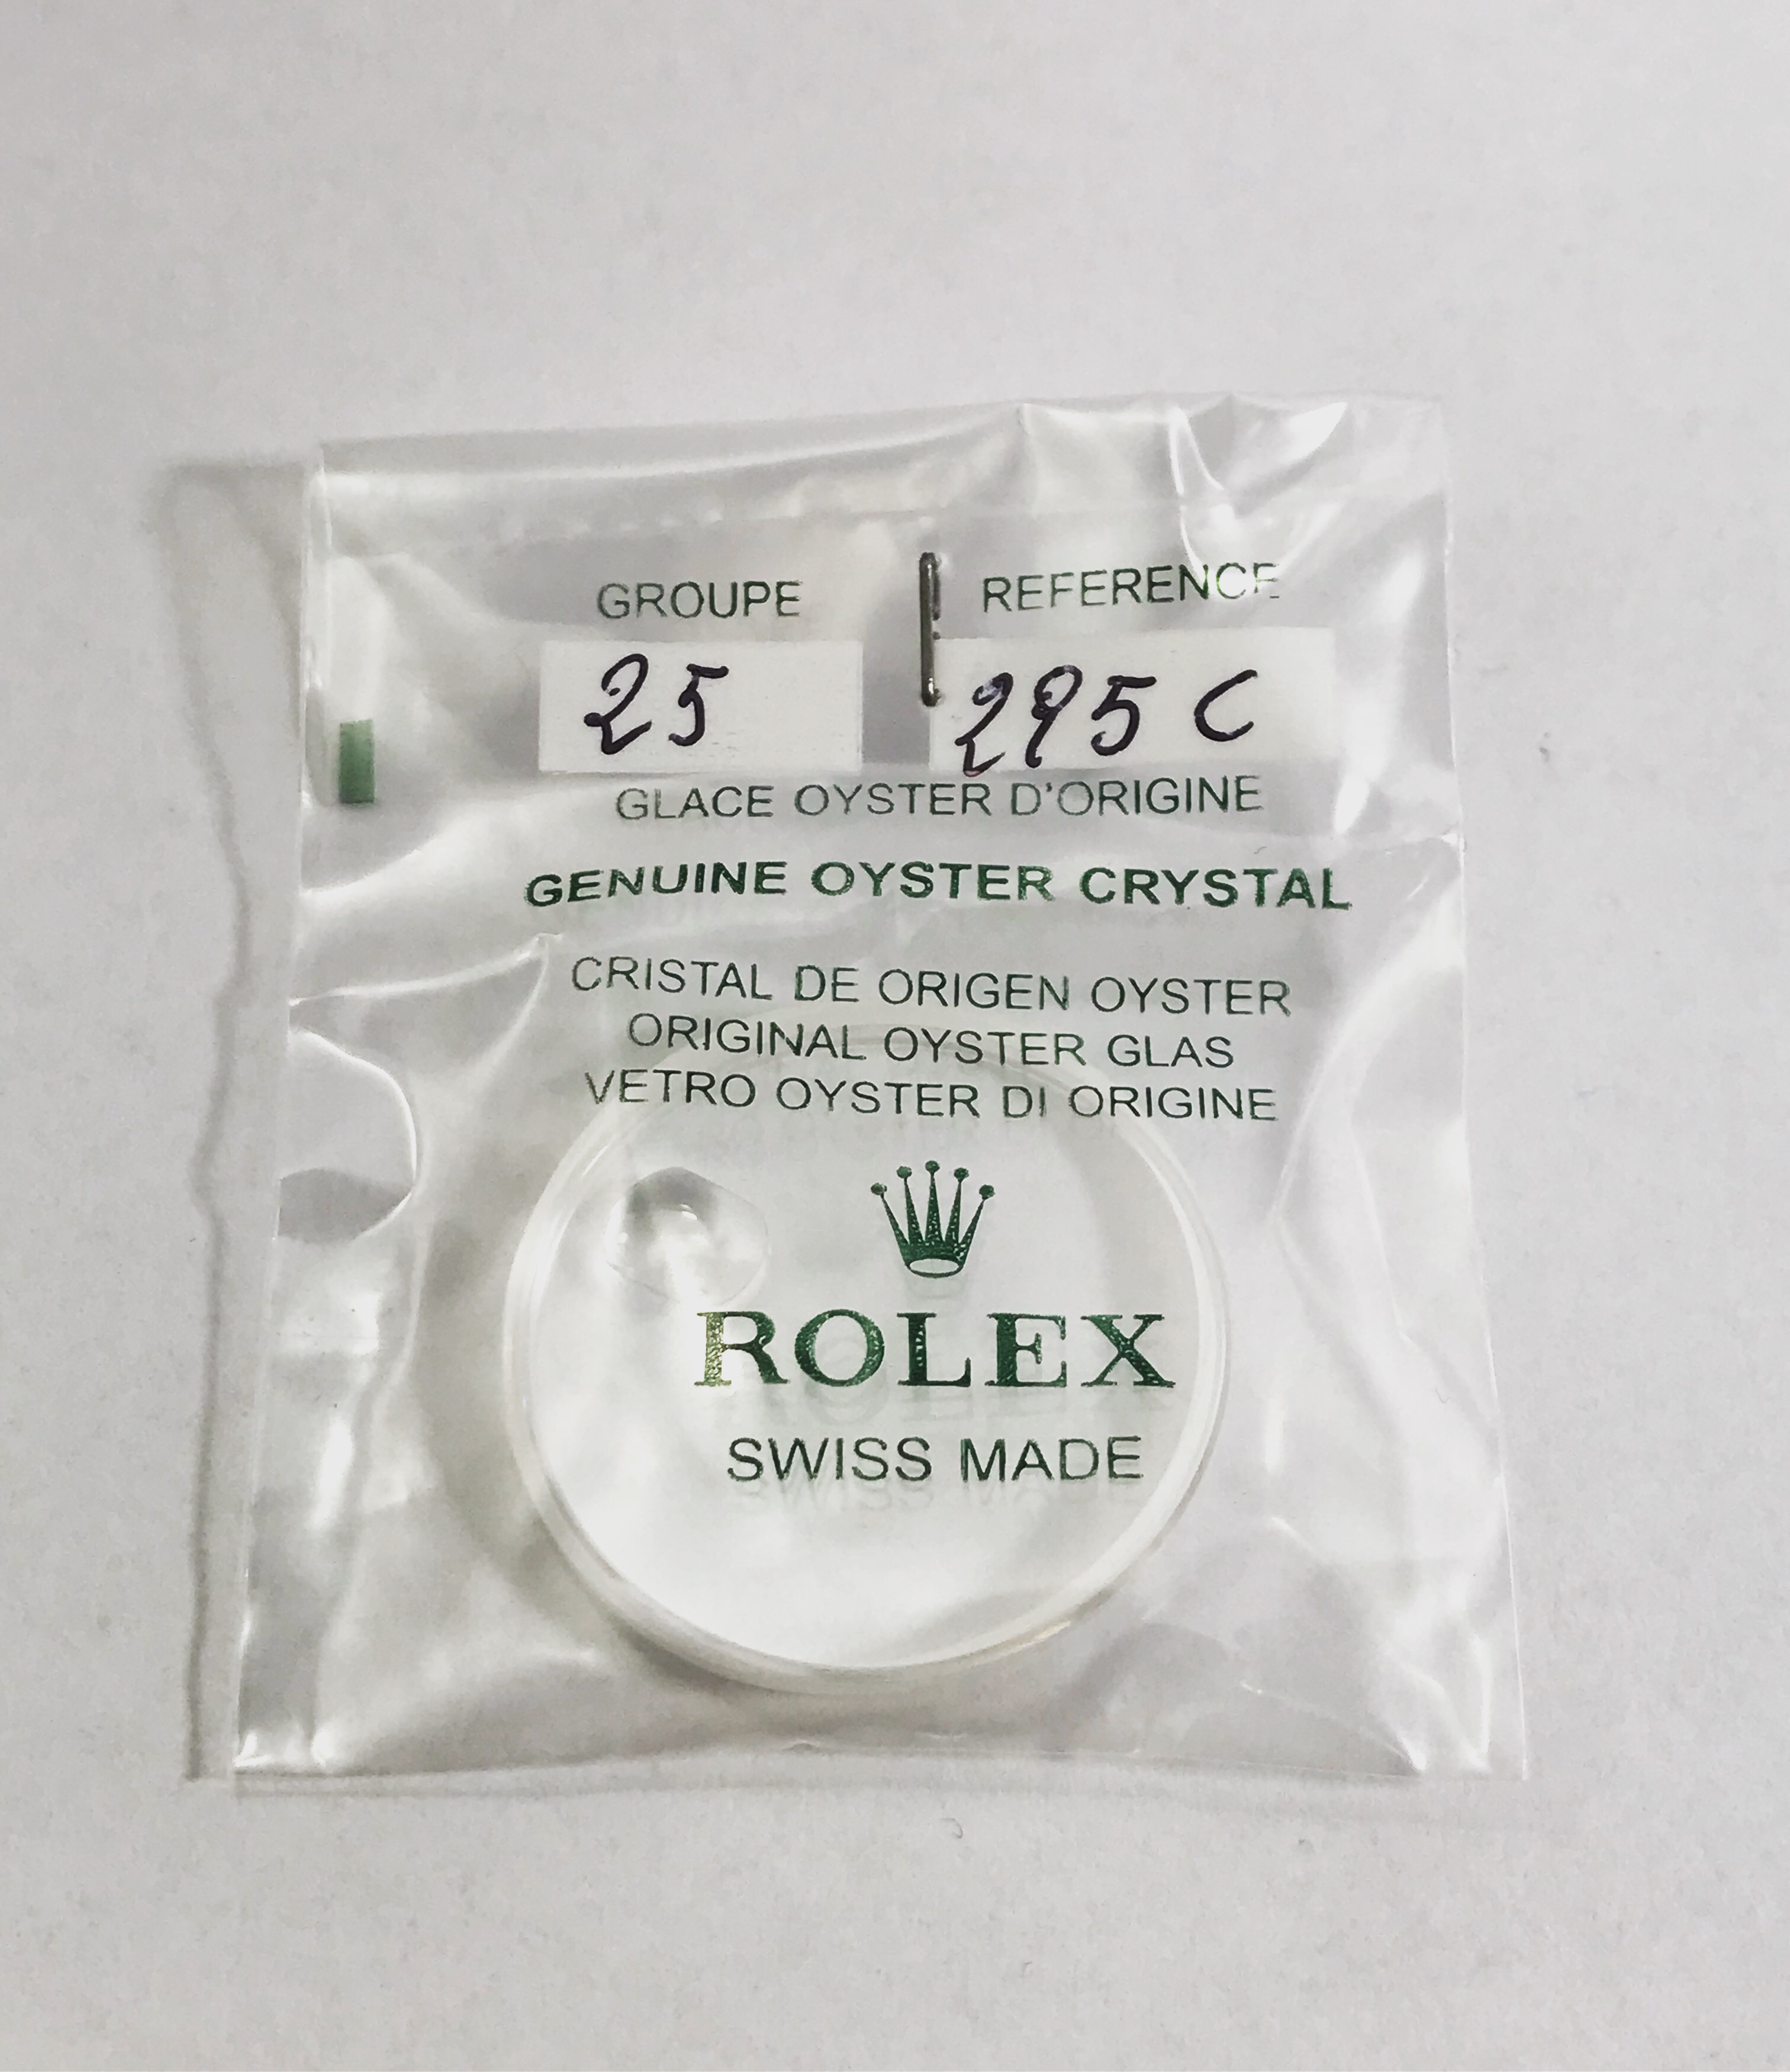 Rolex Sapphire Crystal glass old production 16800, 16710 - Rolex